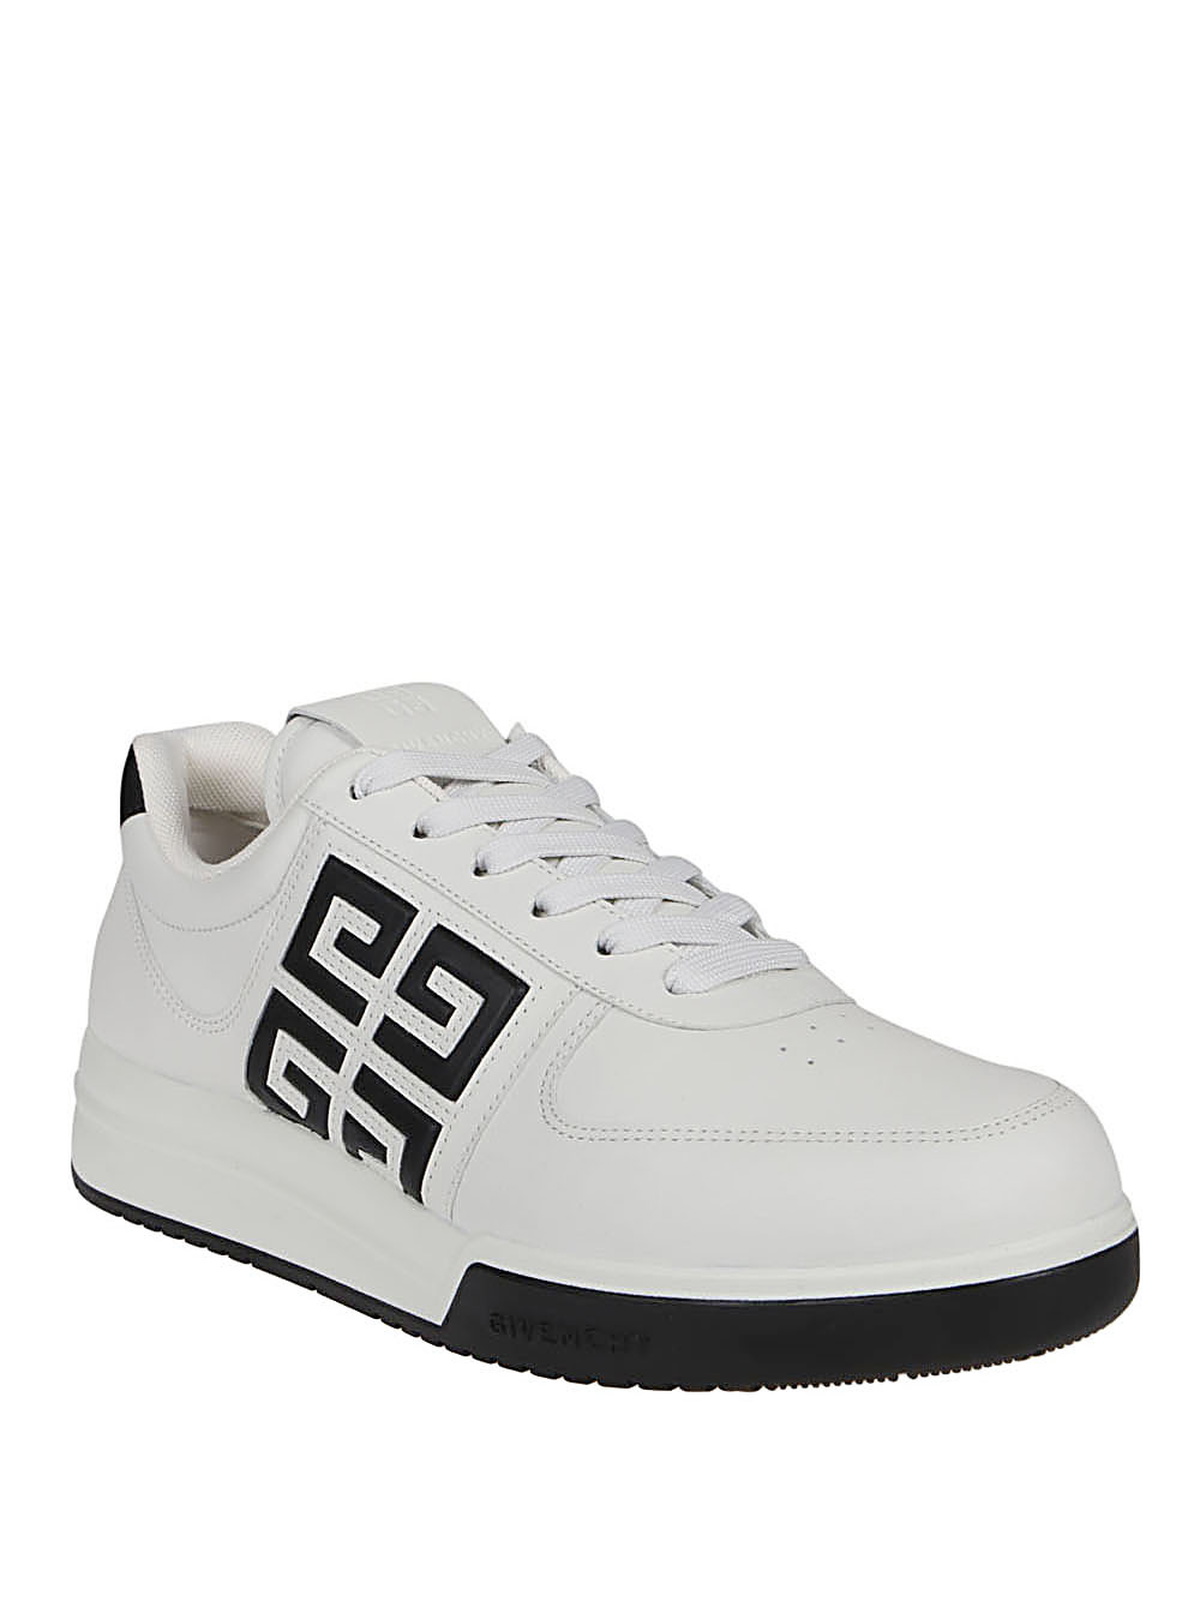 GIVENCHY - G4 Low Top Sneakers Givenchy